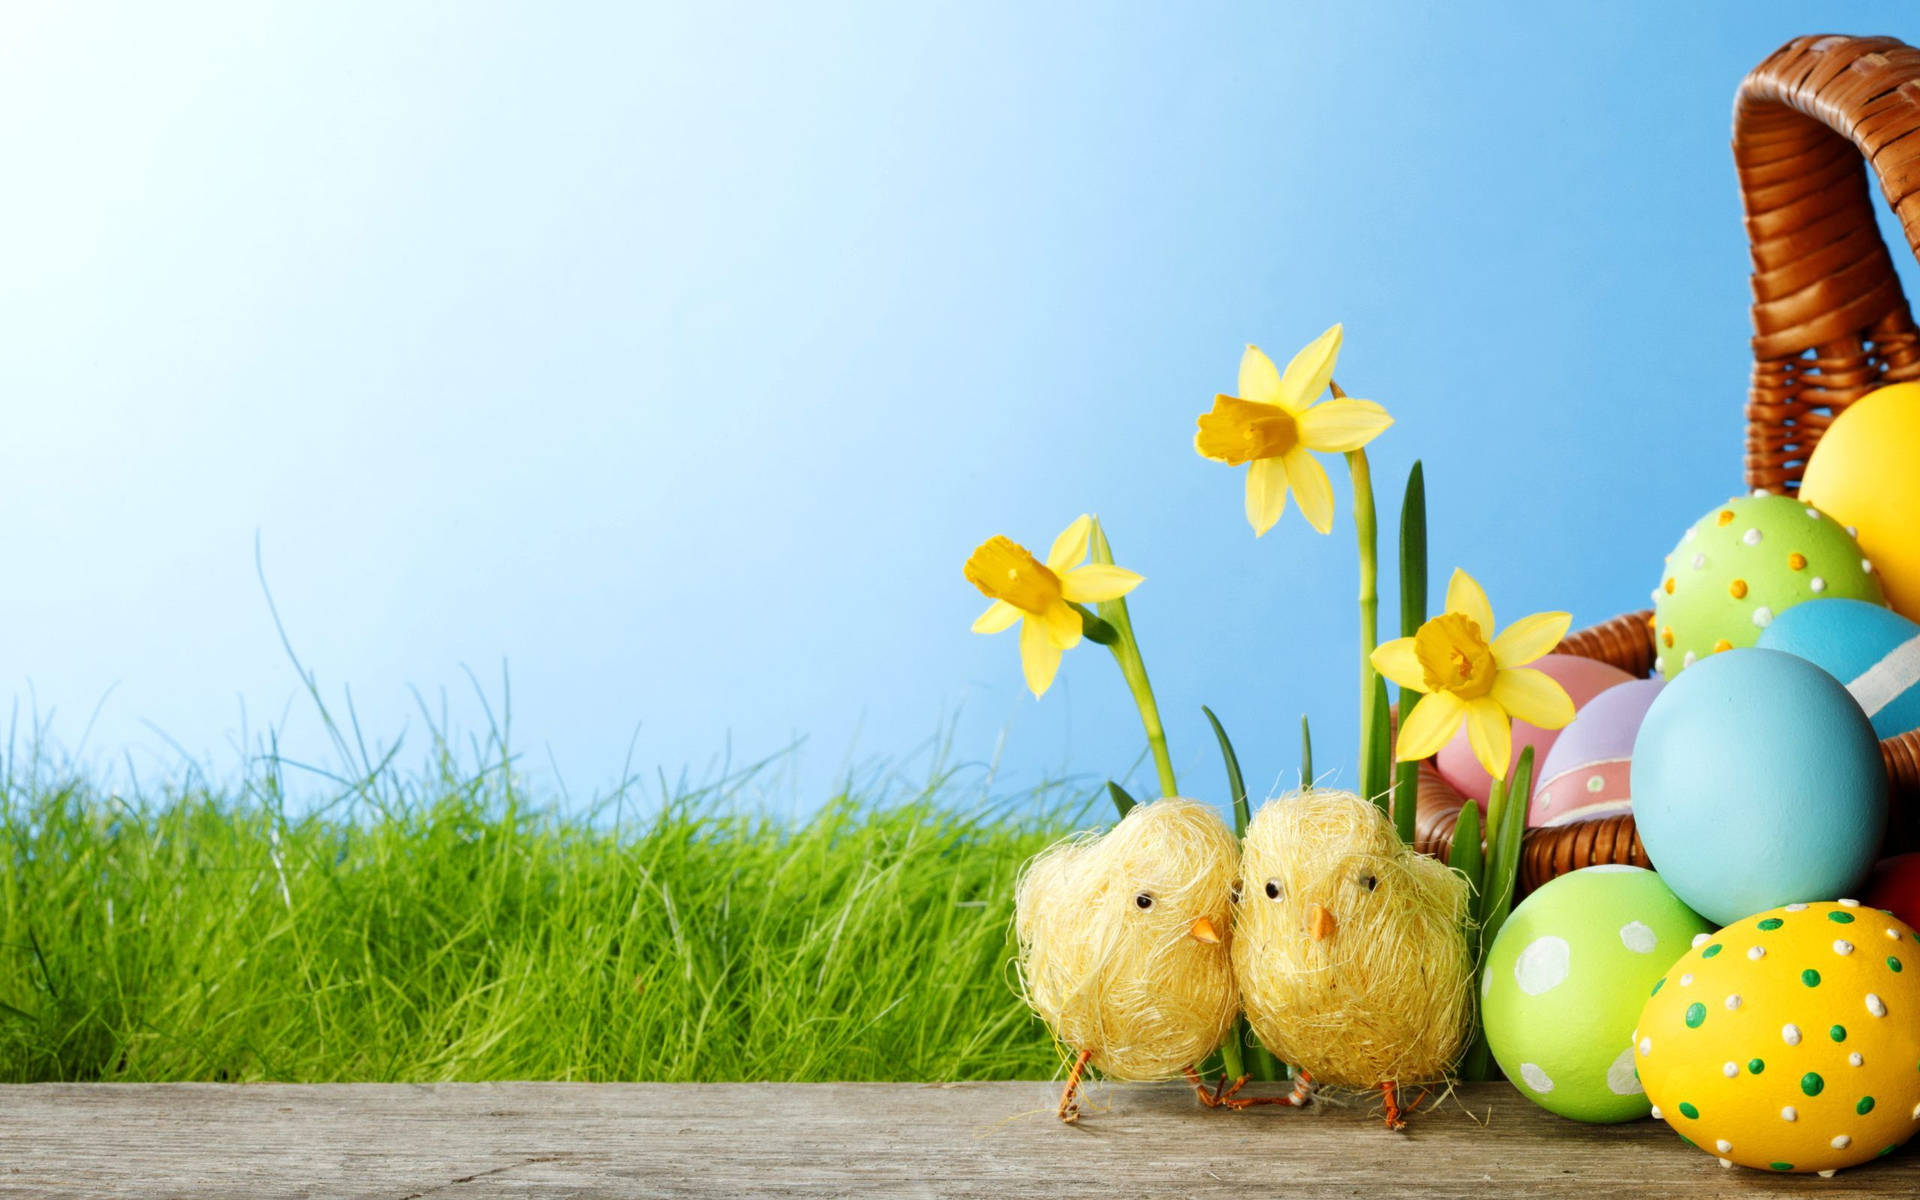 Celebrate Easter With Joyous Decorations of Easter Eggs, Chicks, and Flowers Wallpaper